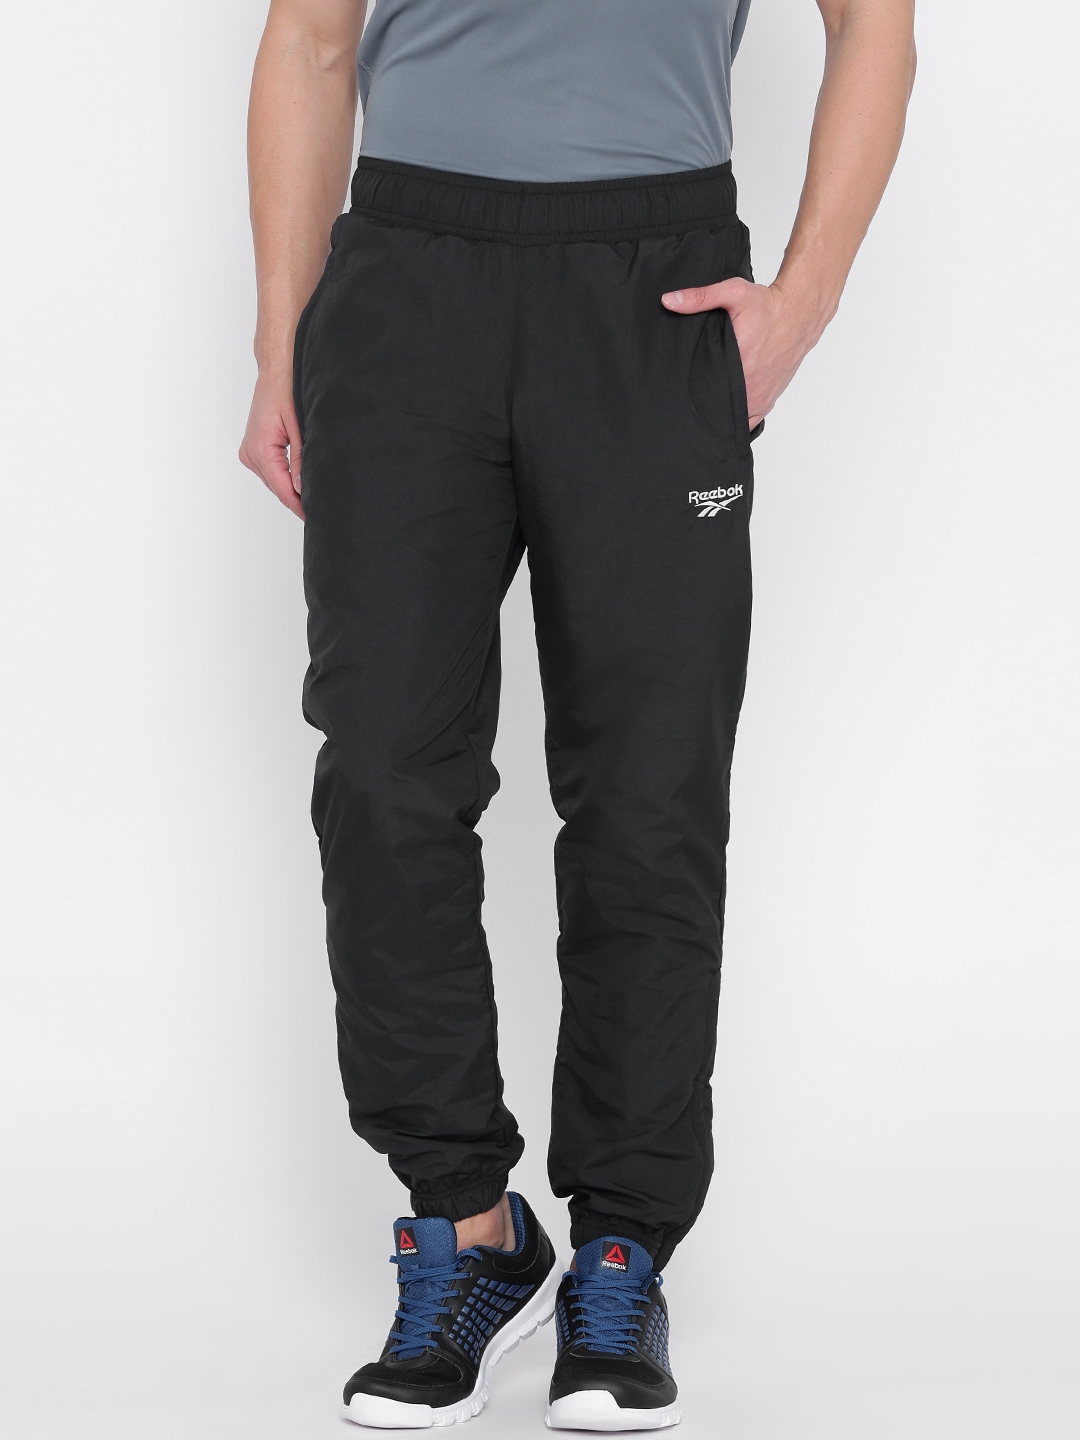 Vector X Trackpants  Buy Vector X Men Navy Blue Athleisure Activewear  Sportswear Track Pants Online  Nykaa Fashion